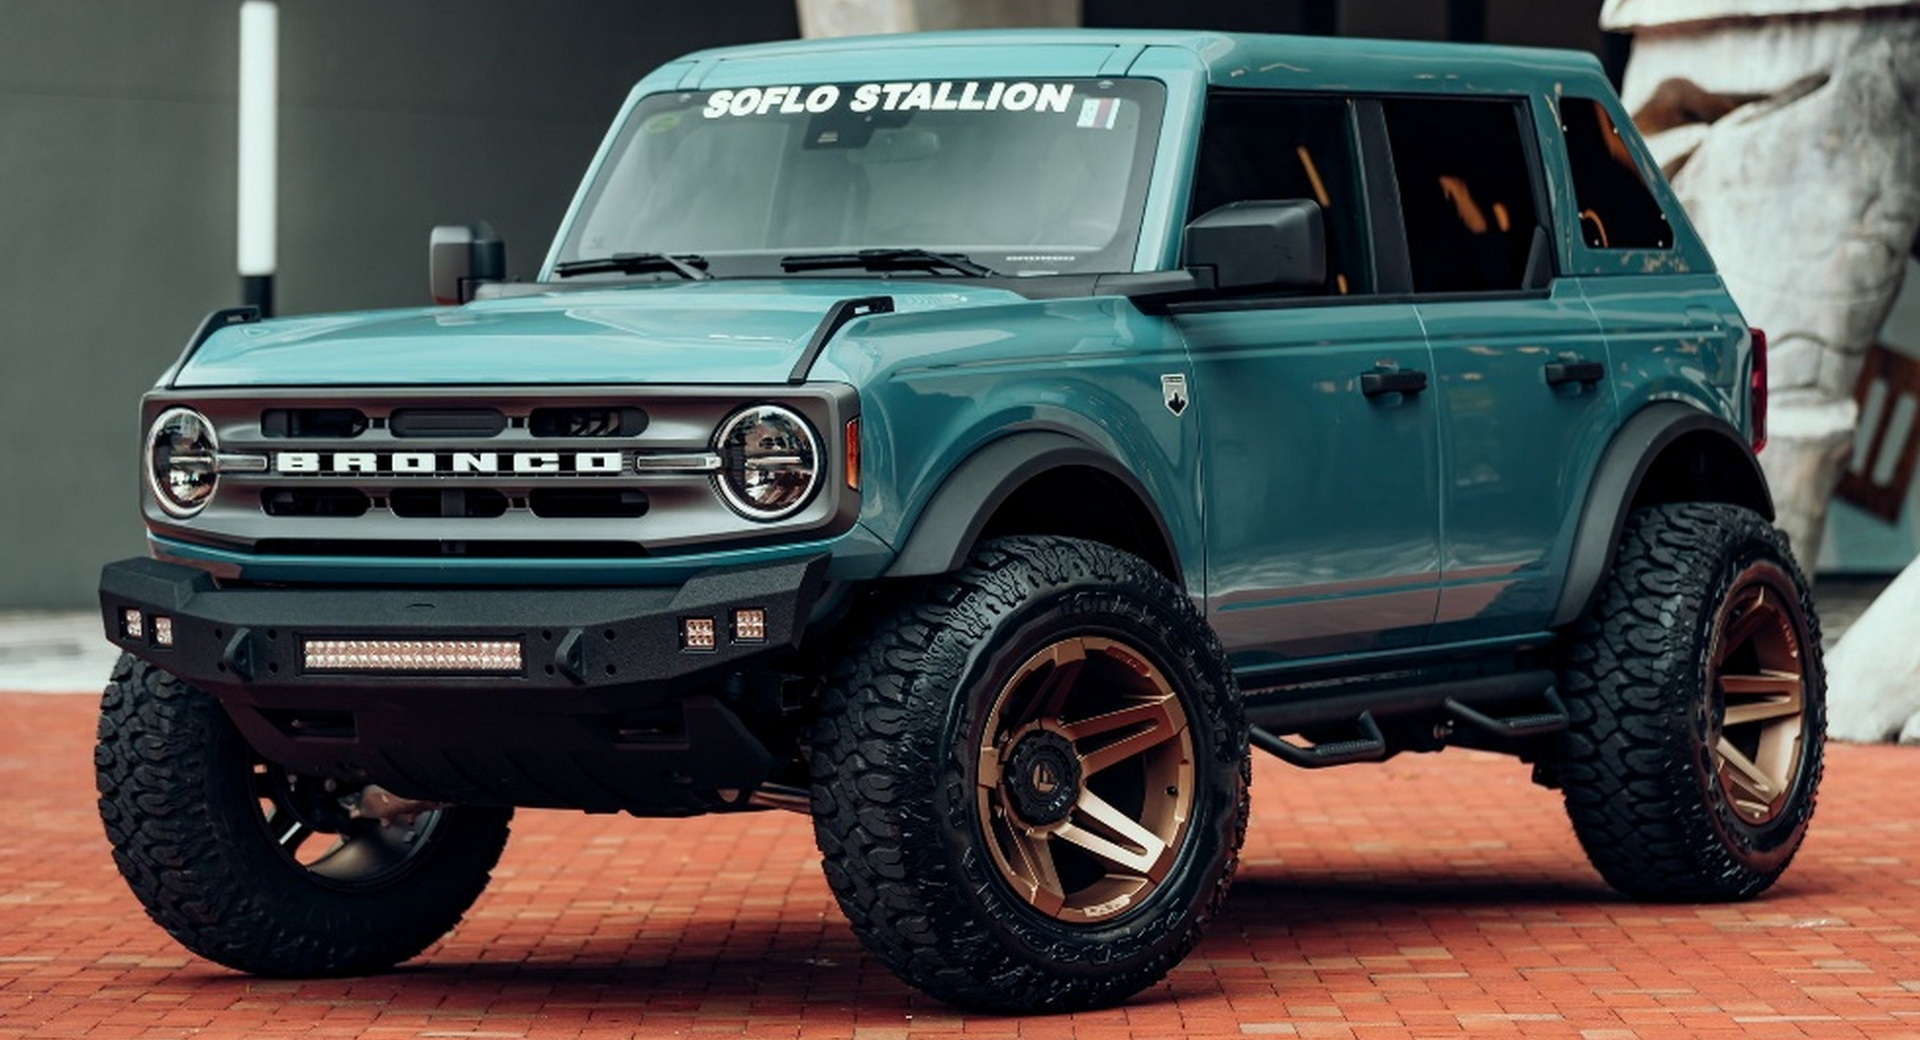 When A Jeep Shop Gets Its Hands On A Ford, The Result Is 700 HP  Coyote-Powered Ford Bronco | Carscoops